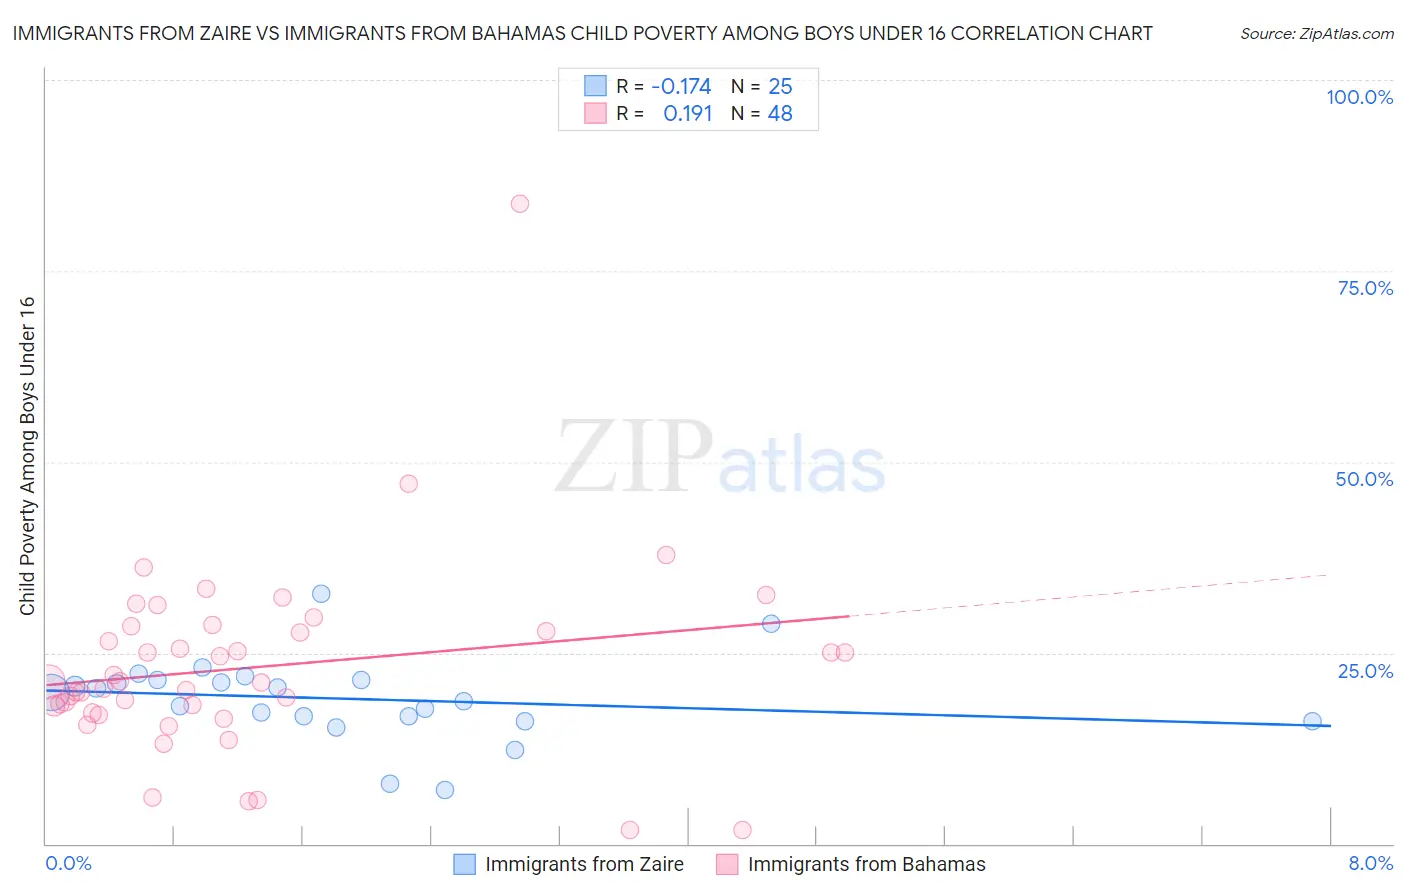 Immigrants from Zaire vs Immigrants from Bahamas Child Poverty Among Boys Under 16